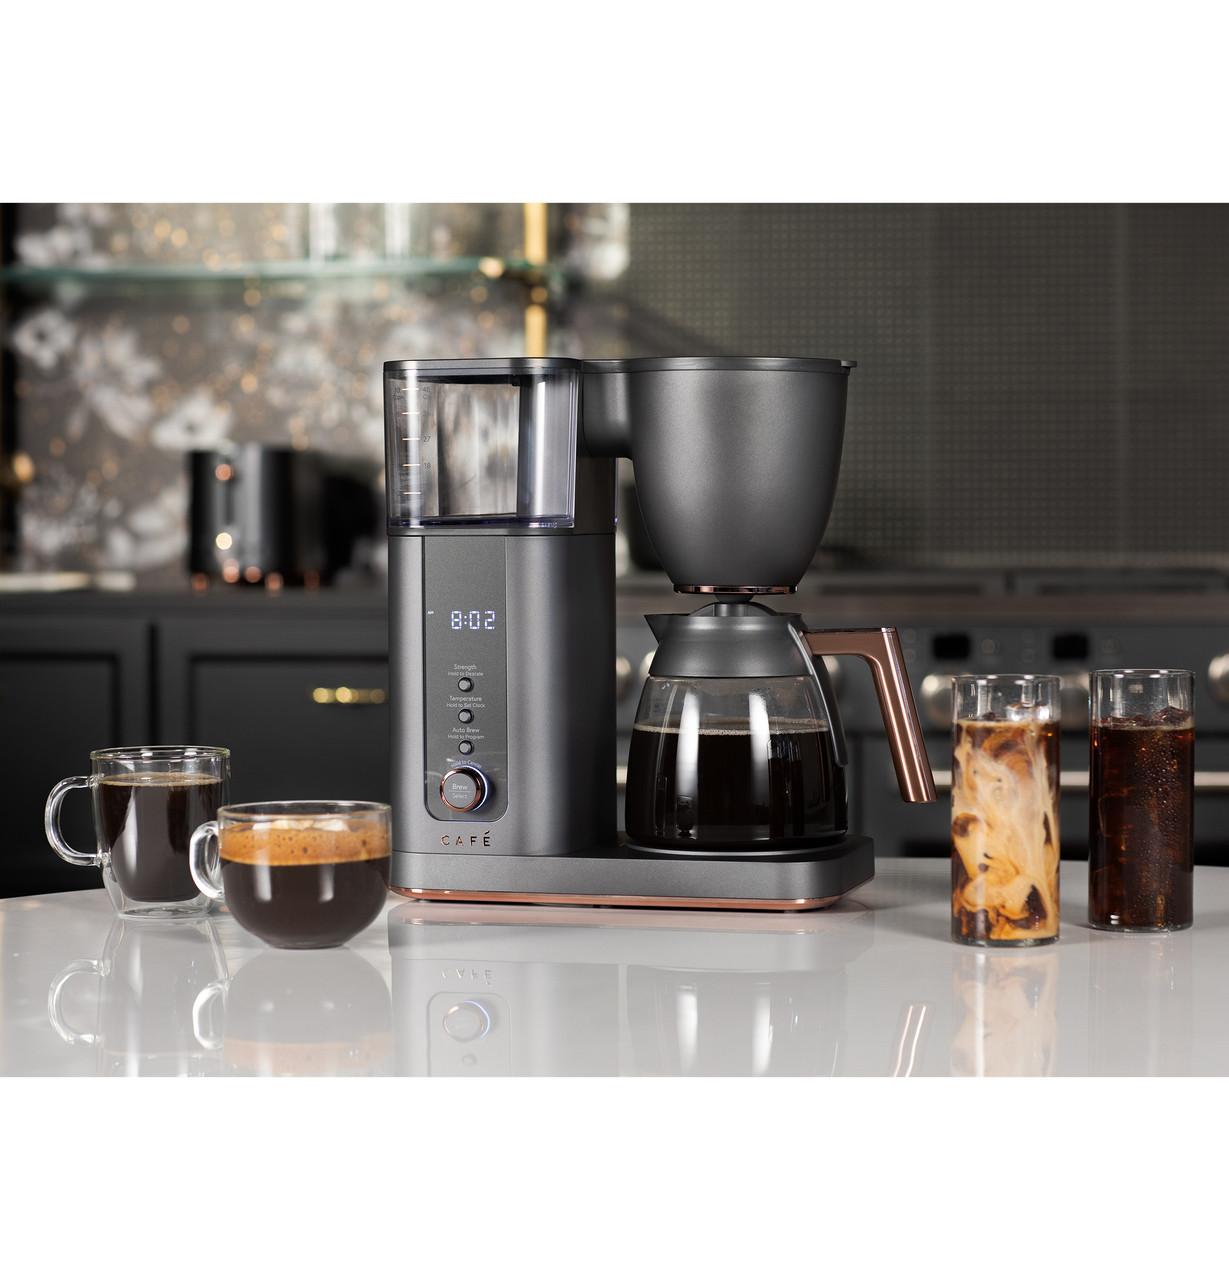 Cafe Specialty Drip Coffee Maker - Stainless Steel